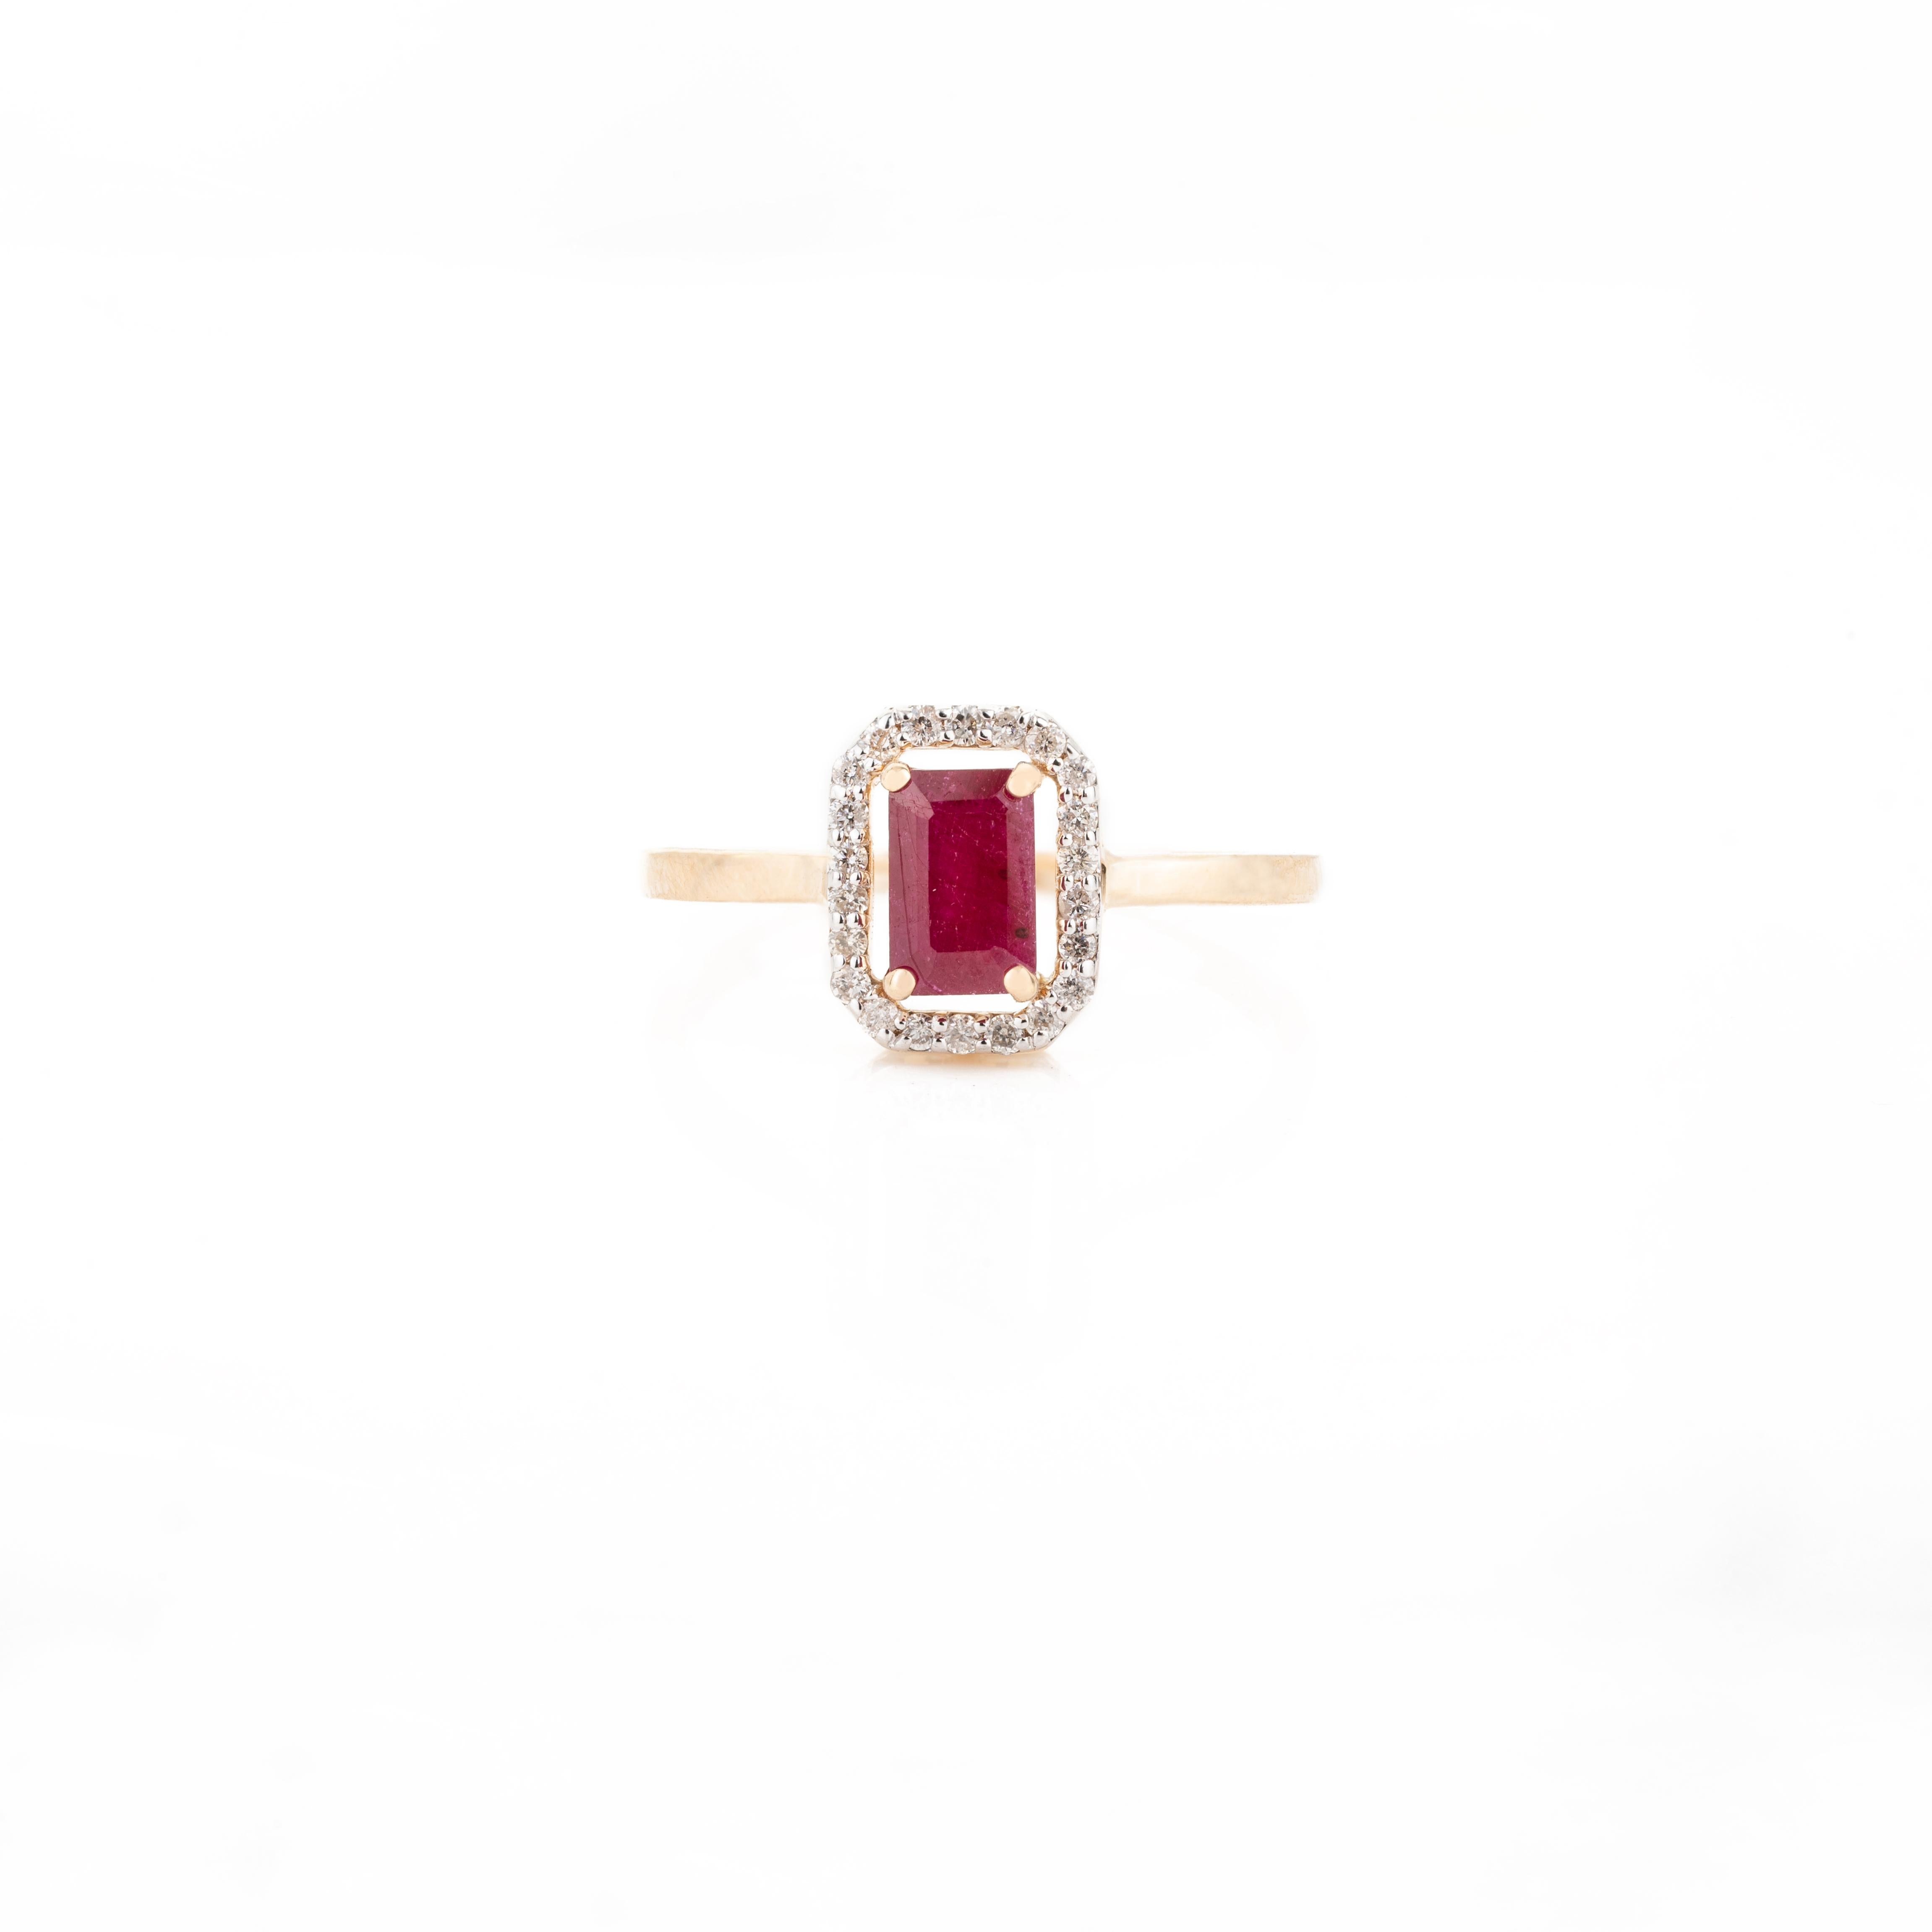 For Sale:  18k Yellow Gold Genuine Ruby Diamond Halo Anniversary Ring Gift for Women 4